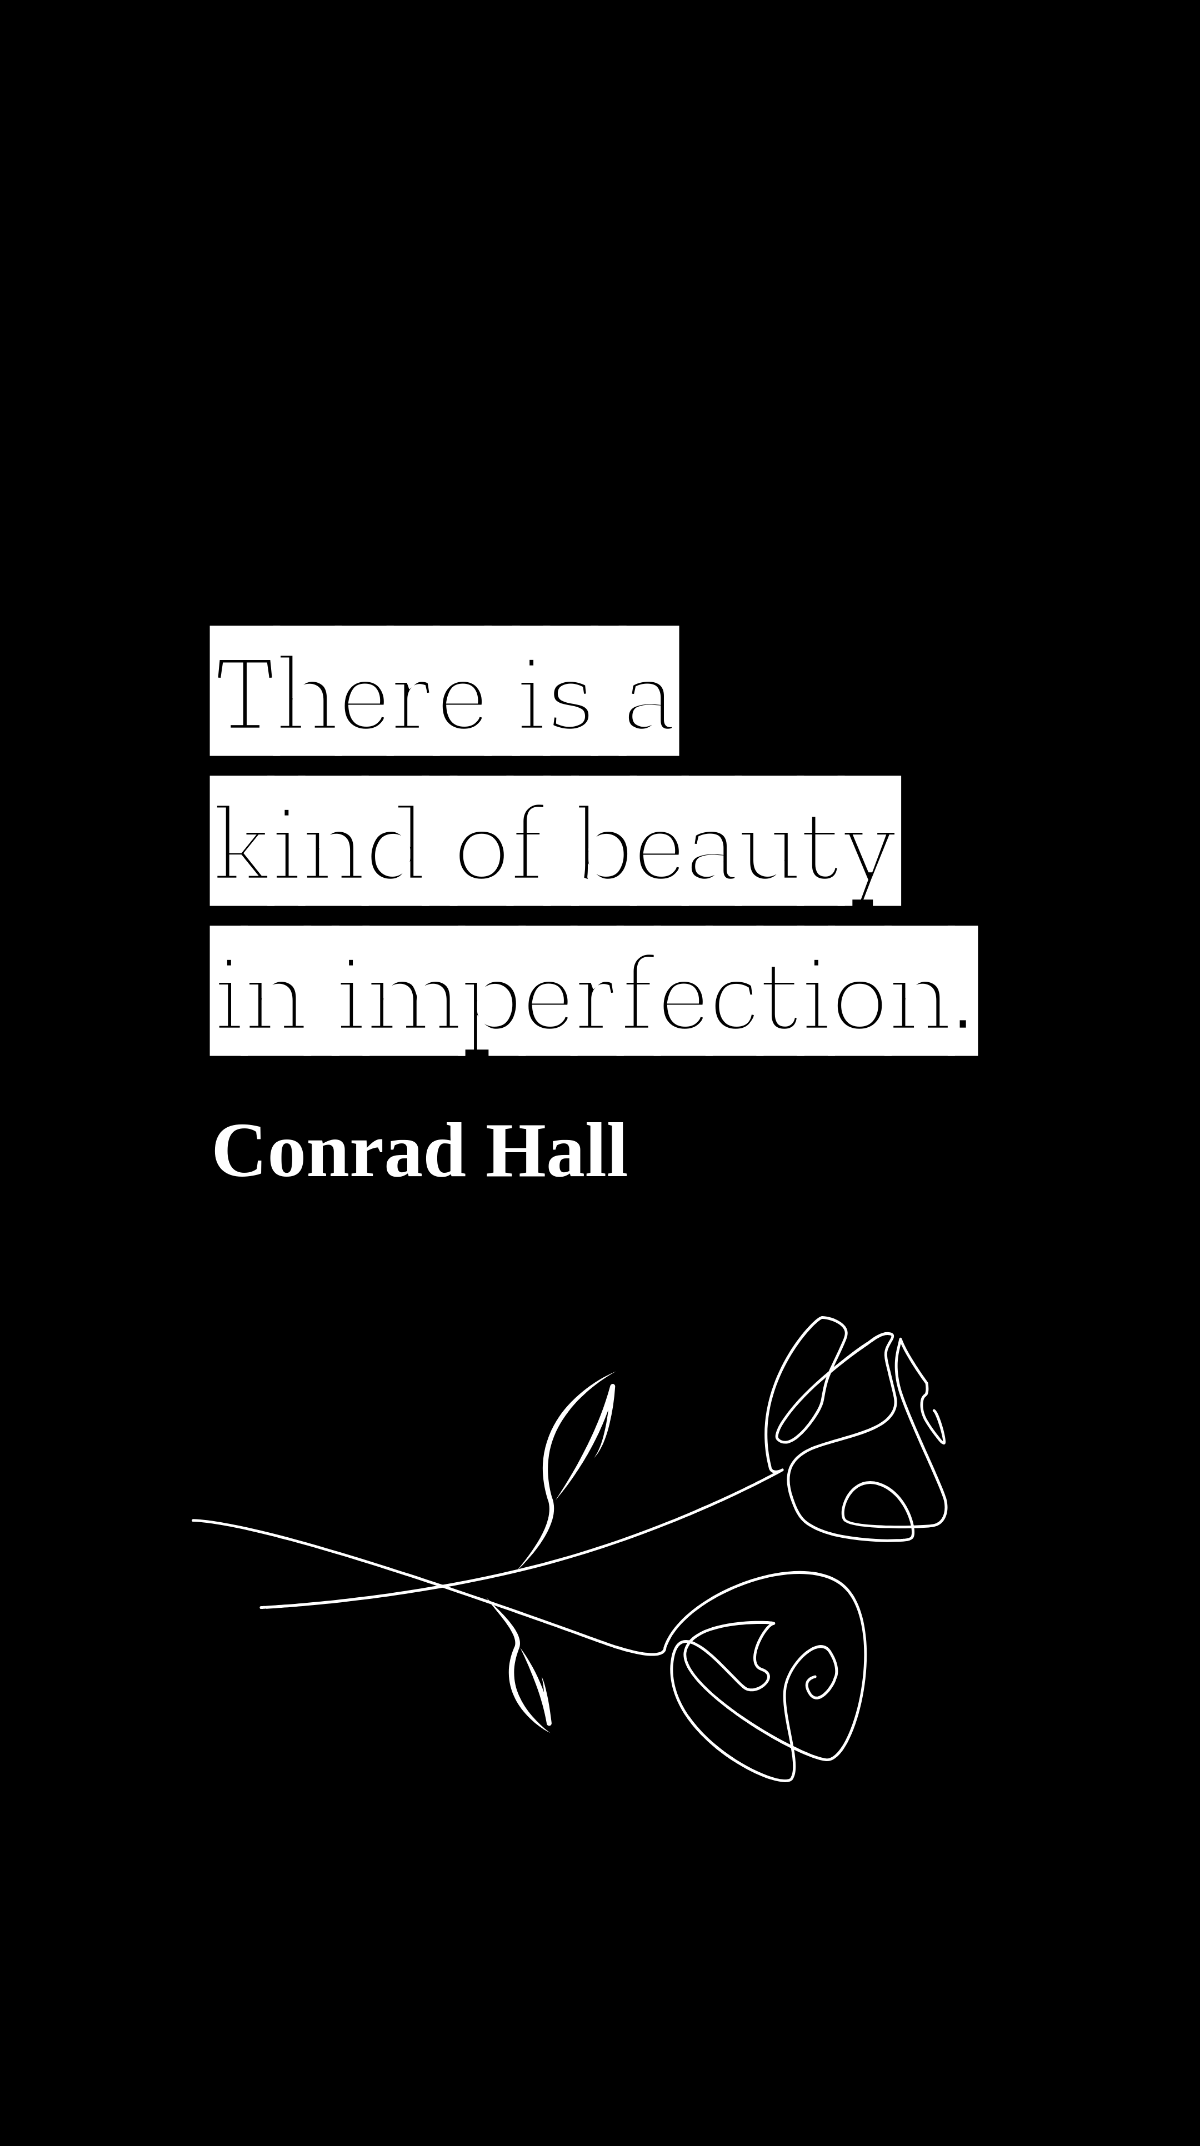 Free Conrad Hall - There is a kind of beauty in imperfection. Template